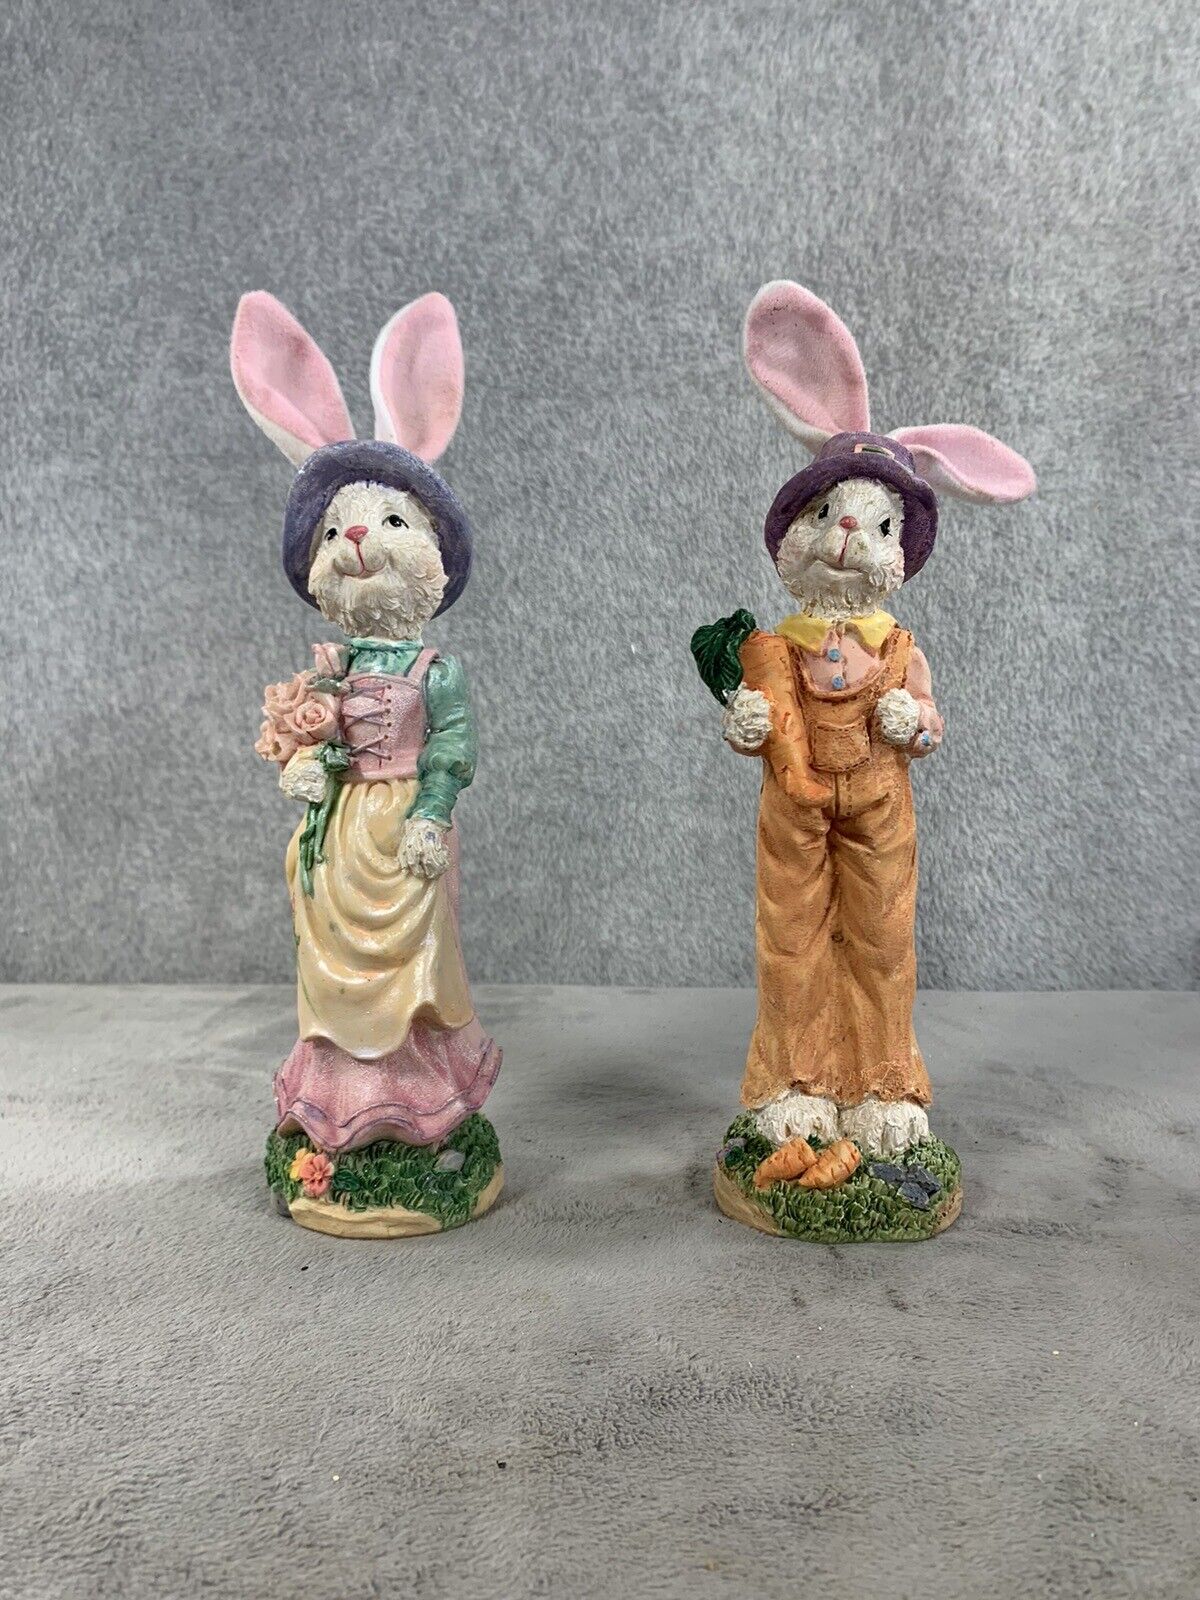 Vintage Set Of 2 Bunny Rabbit Figurines Human Like Wearing Clothes Standing